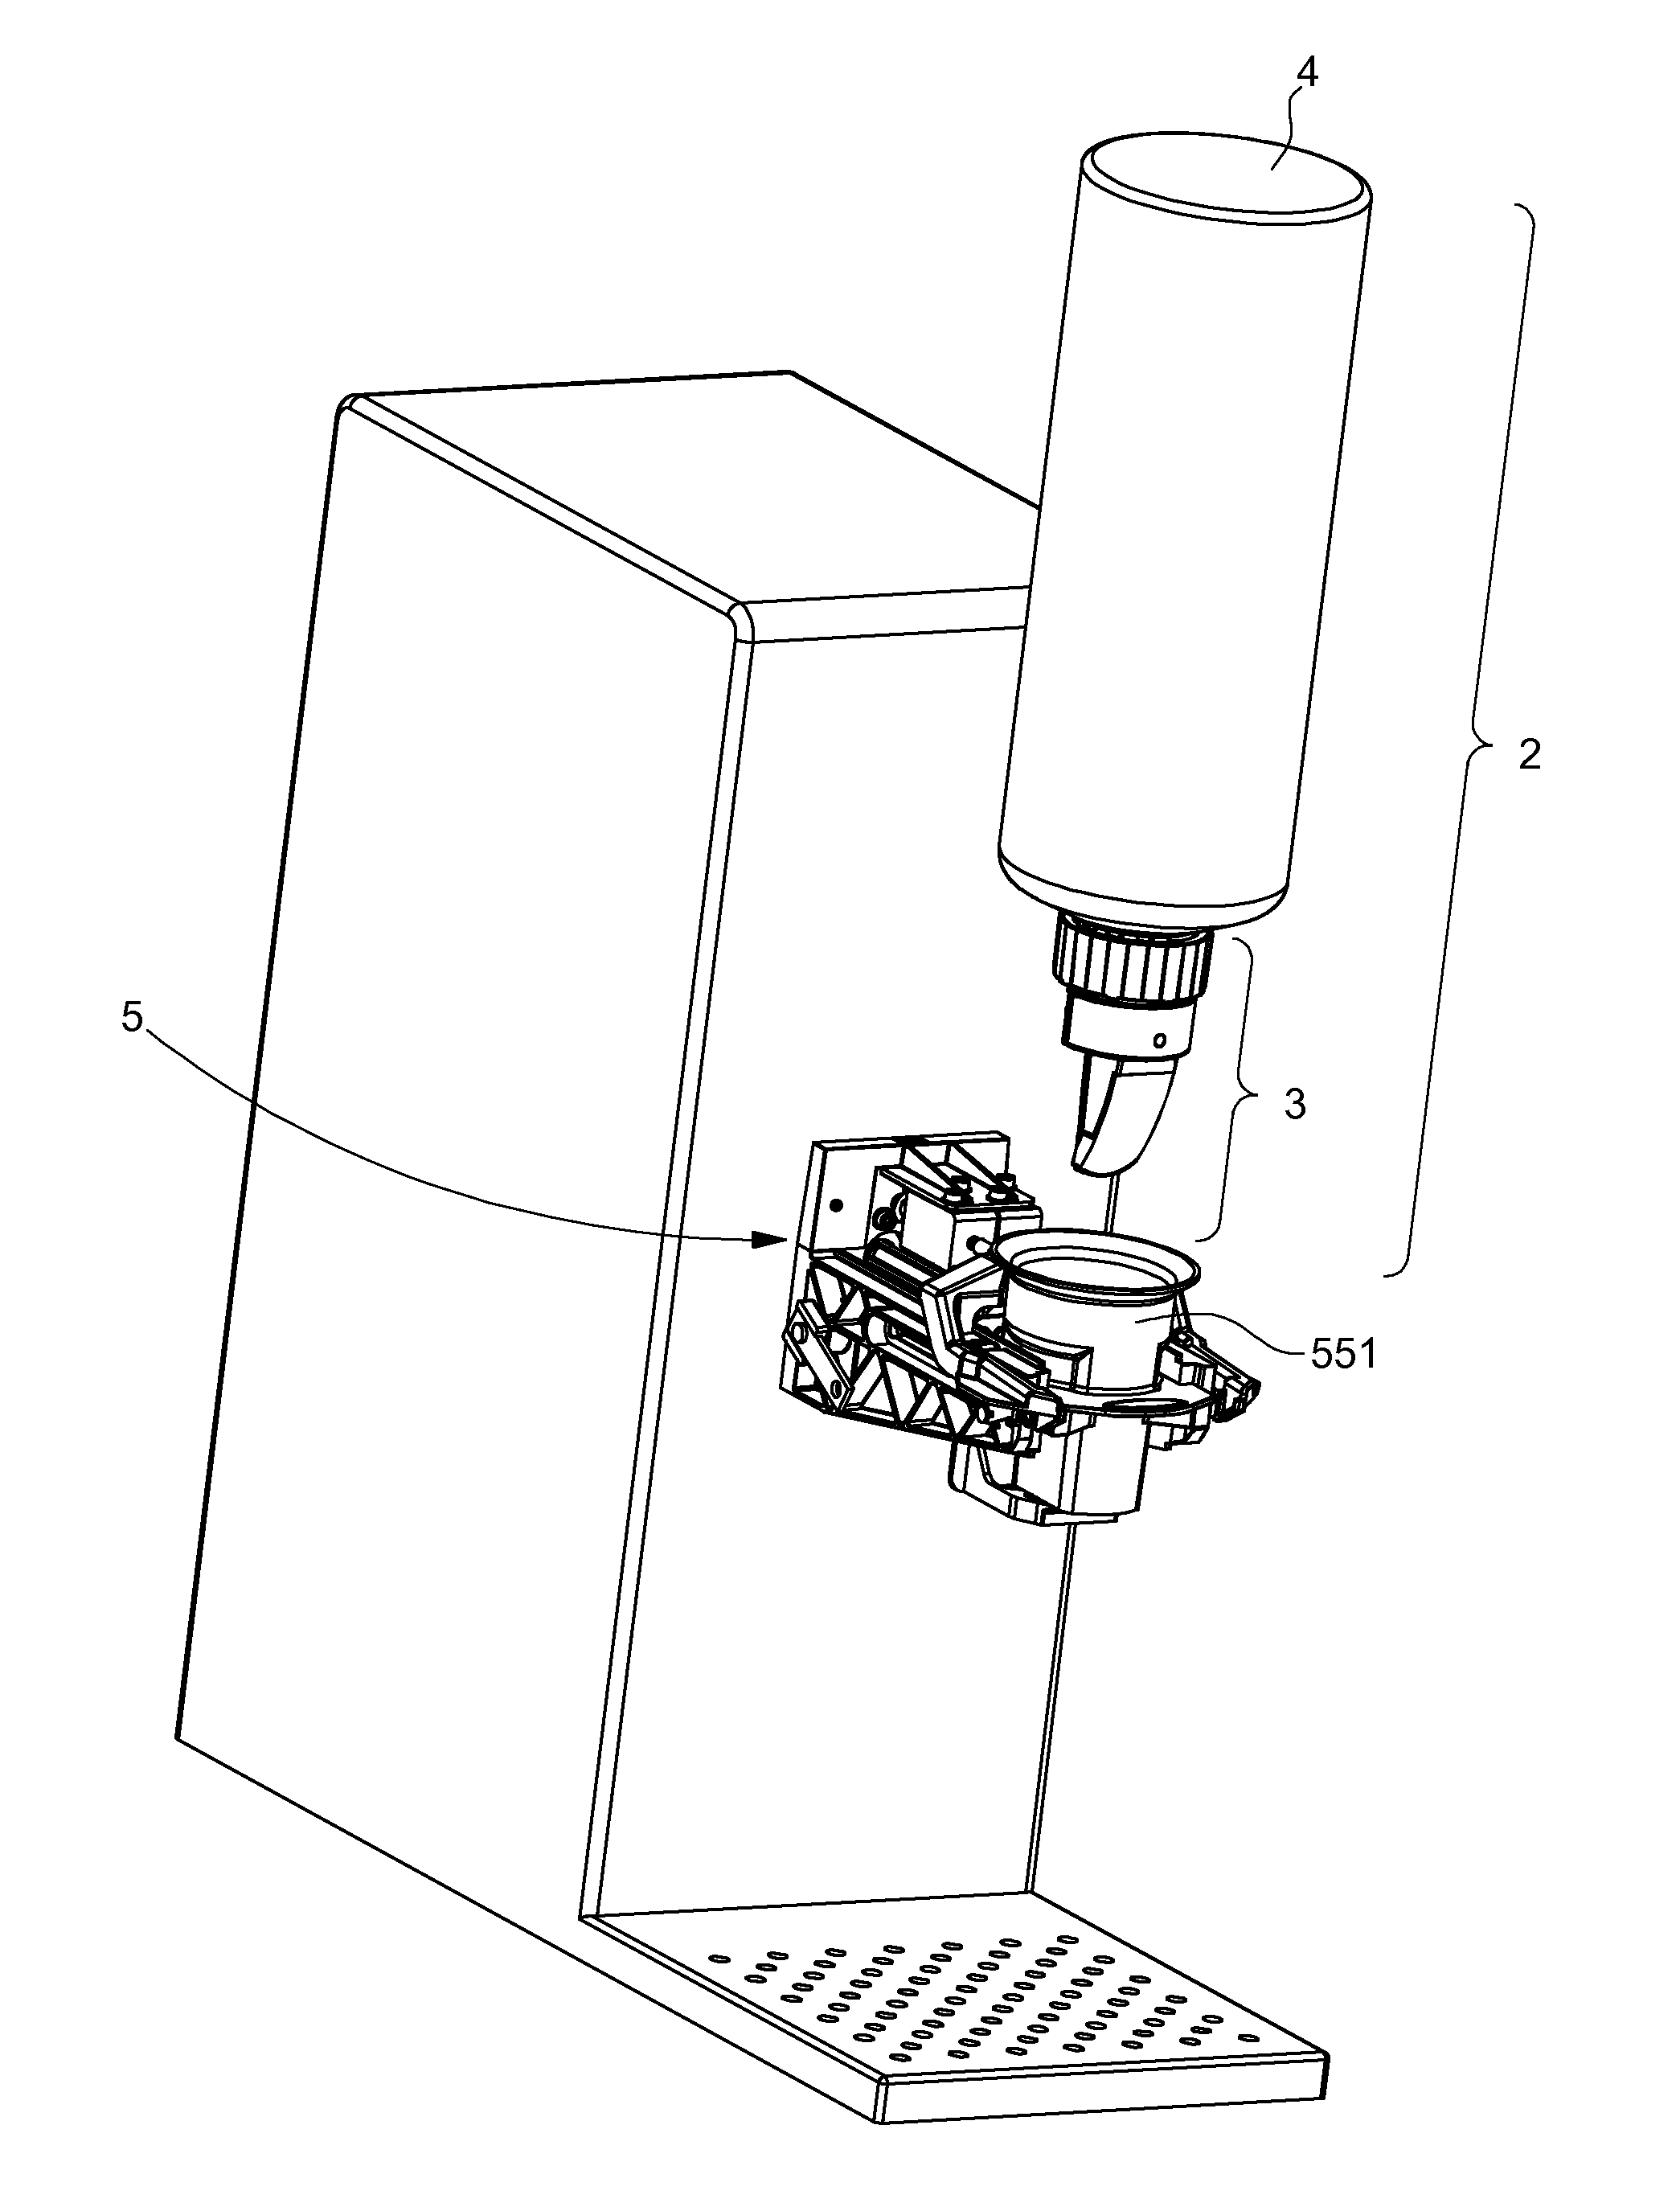 Device for dispensing a liquid